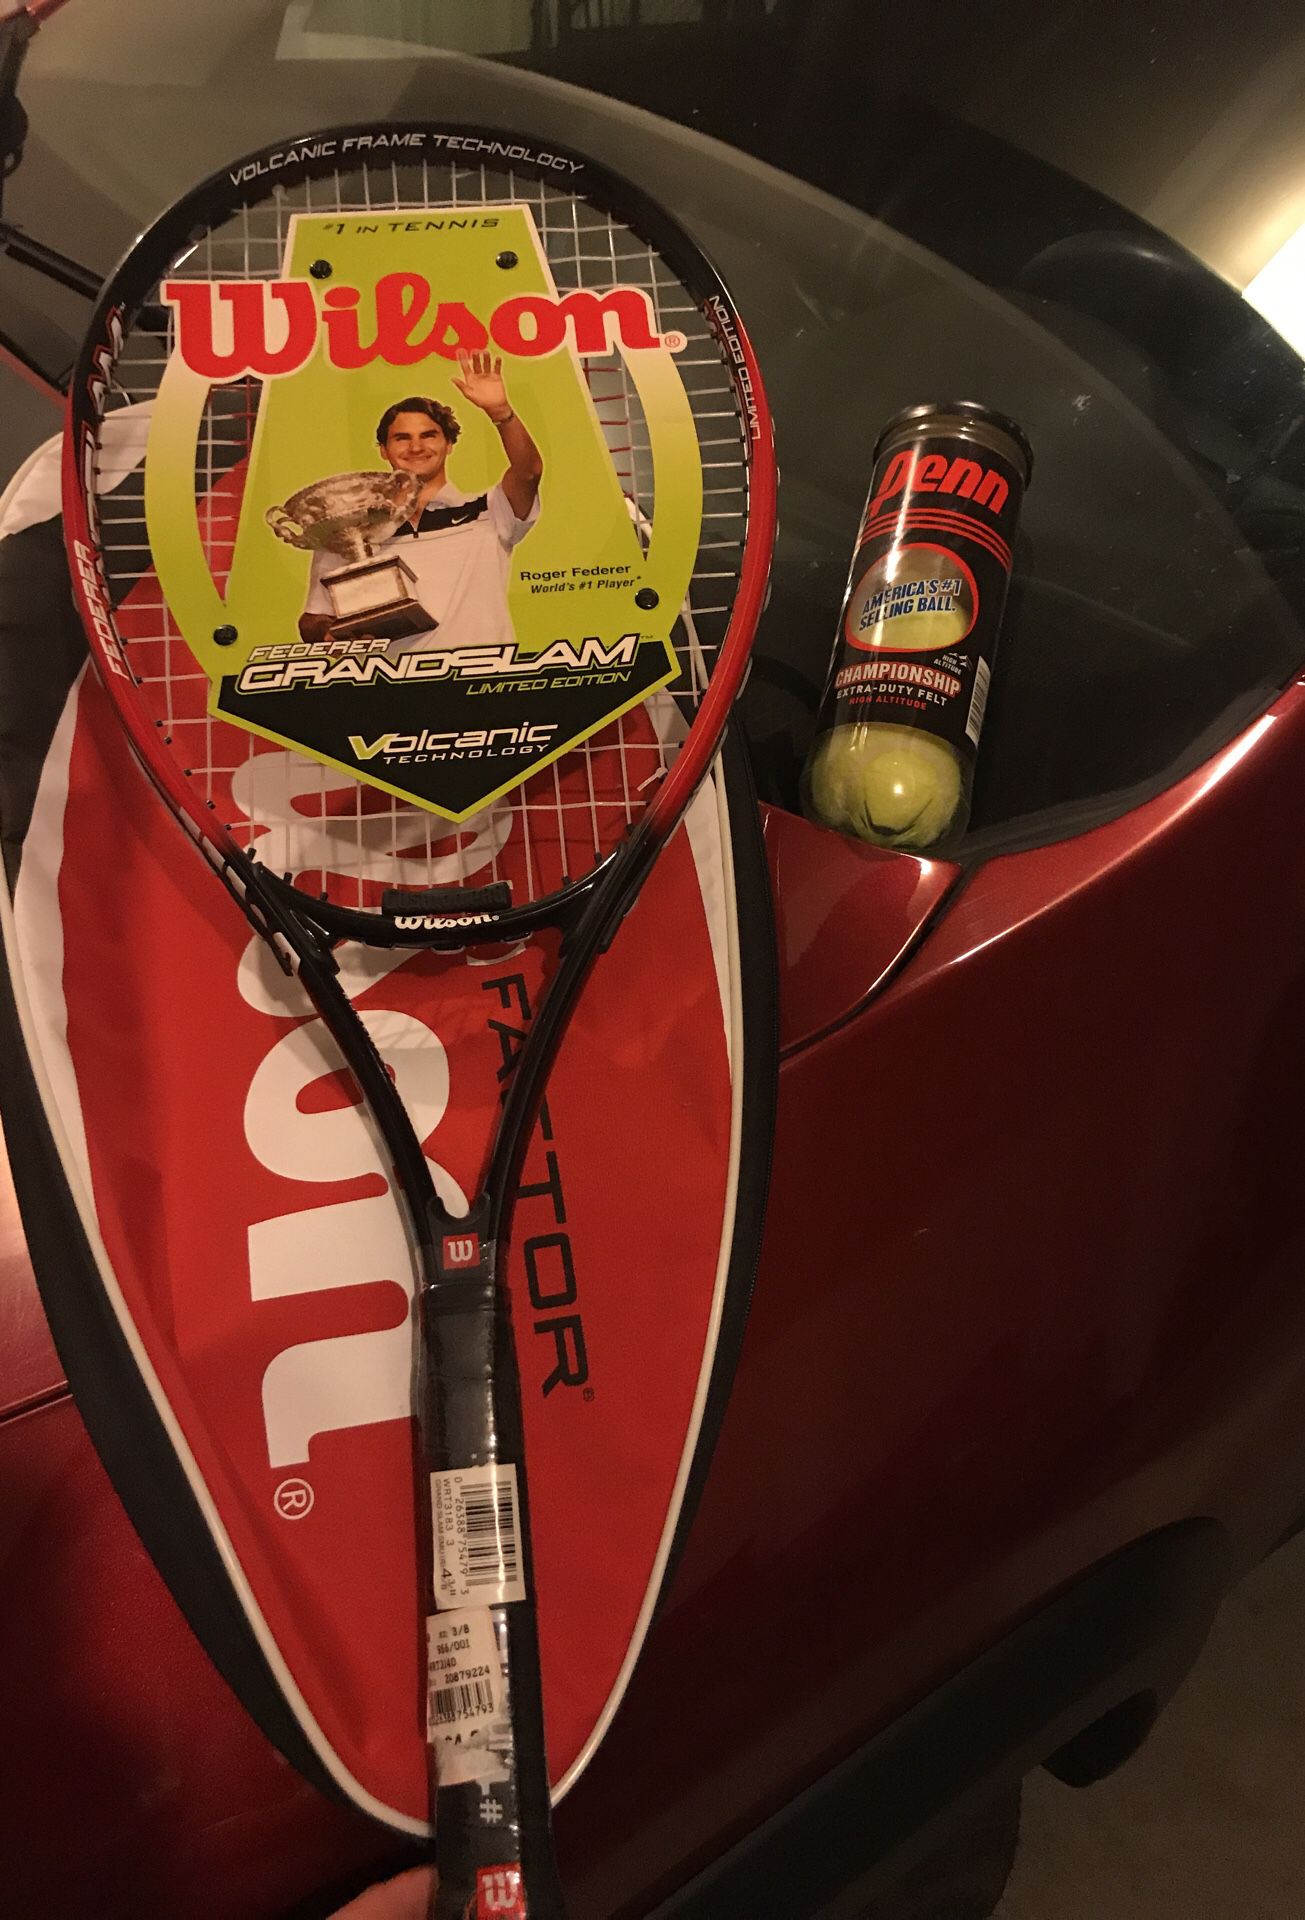 Wilson Tennis Racket and balls - Brand new! Limited Edition